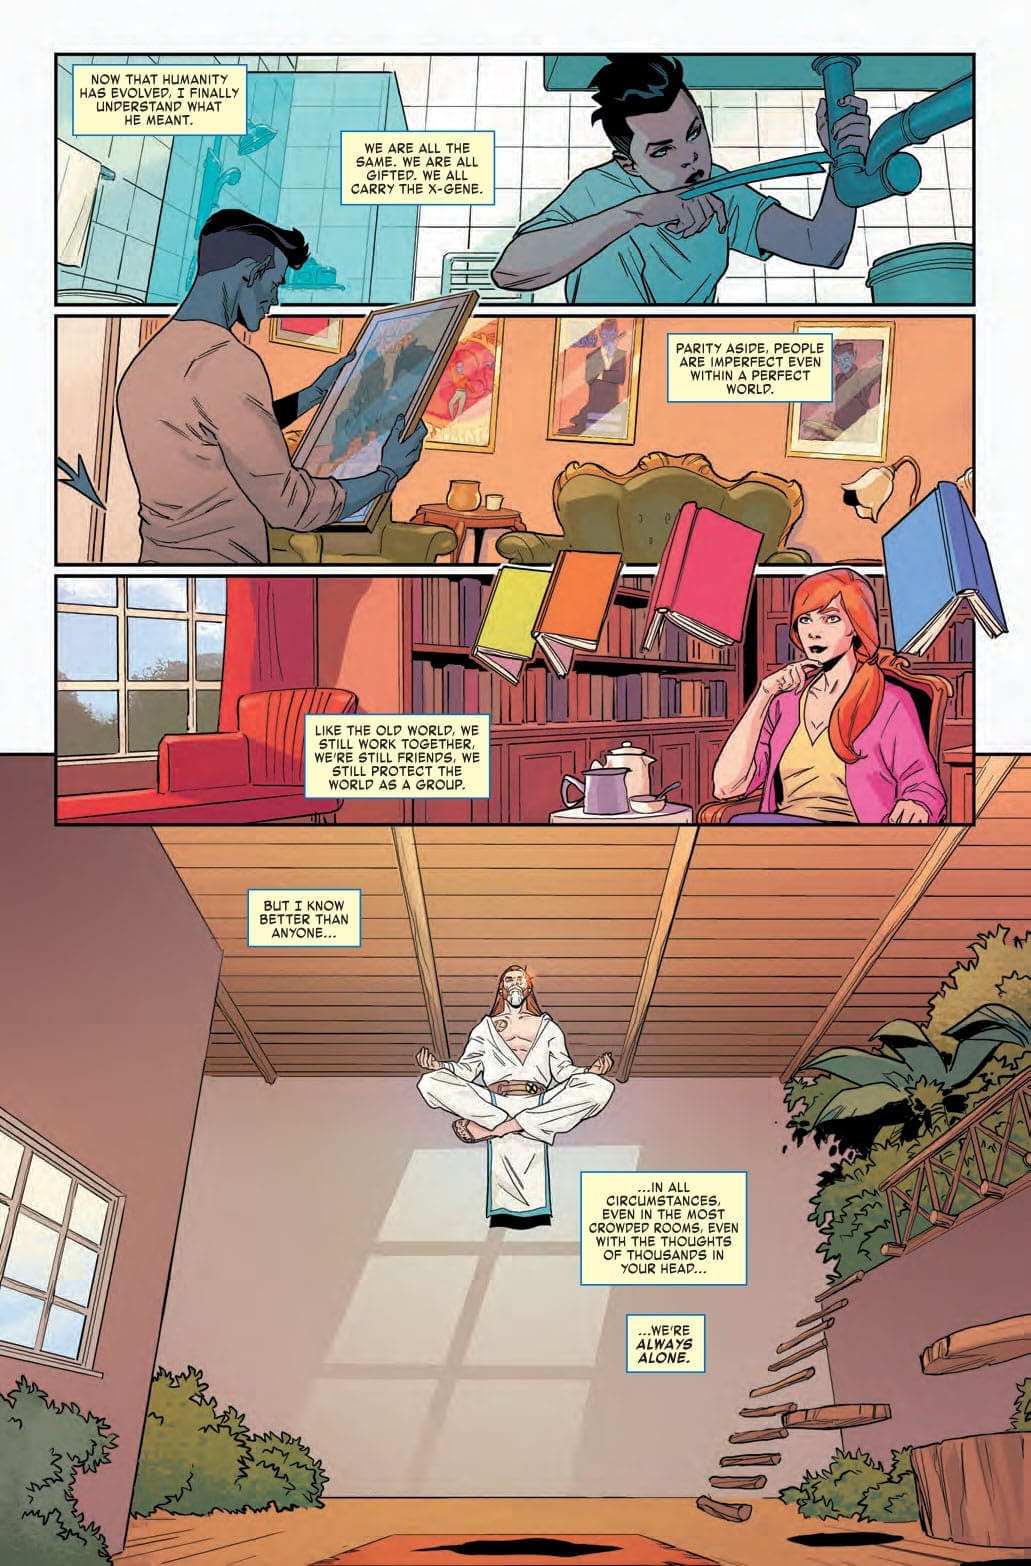 Nate Grey is a Master Retconner in Next Week's Age of X-Man: Marvelous X-Men #1